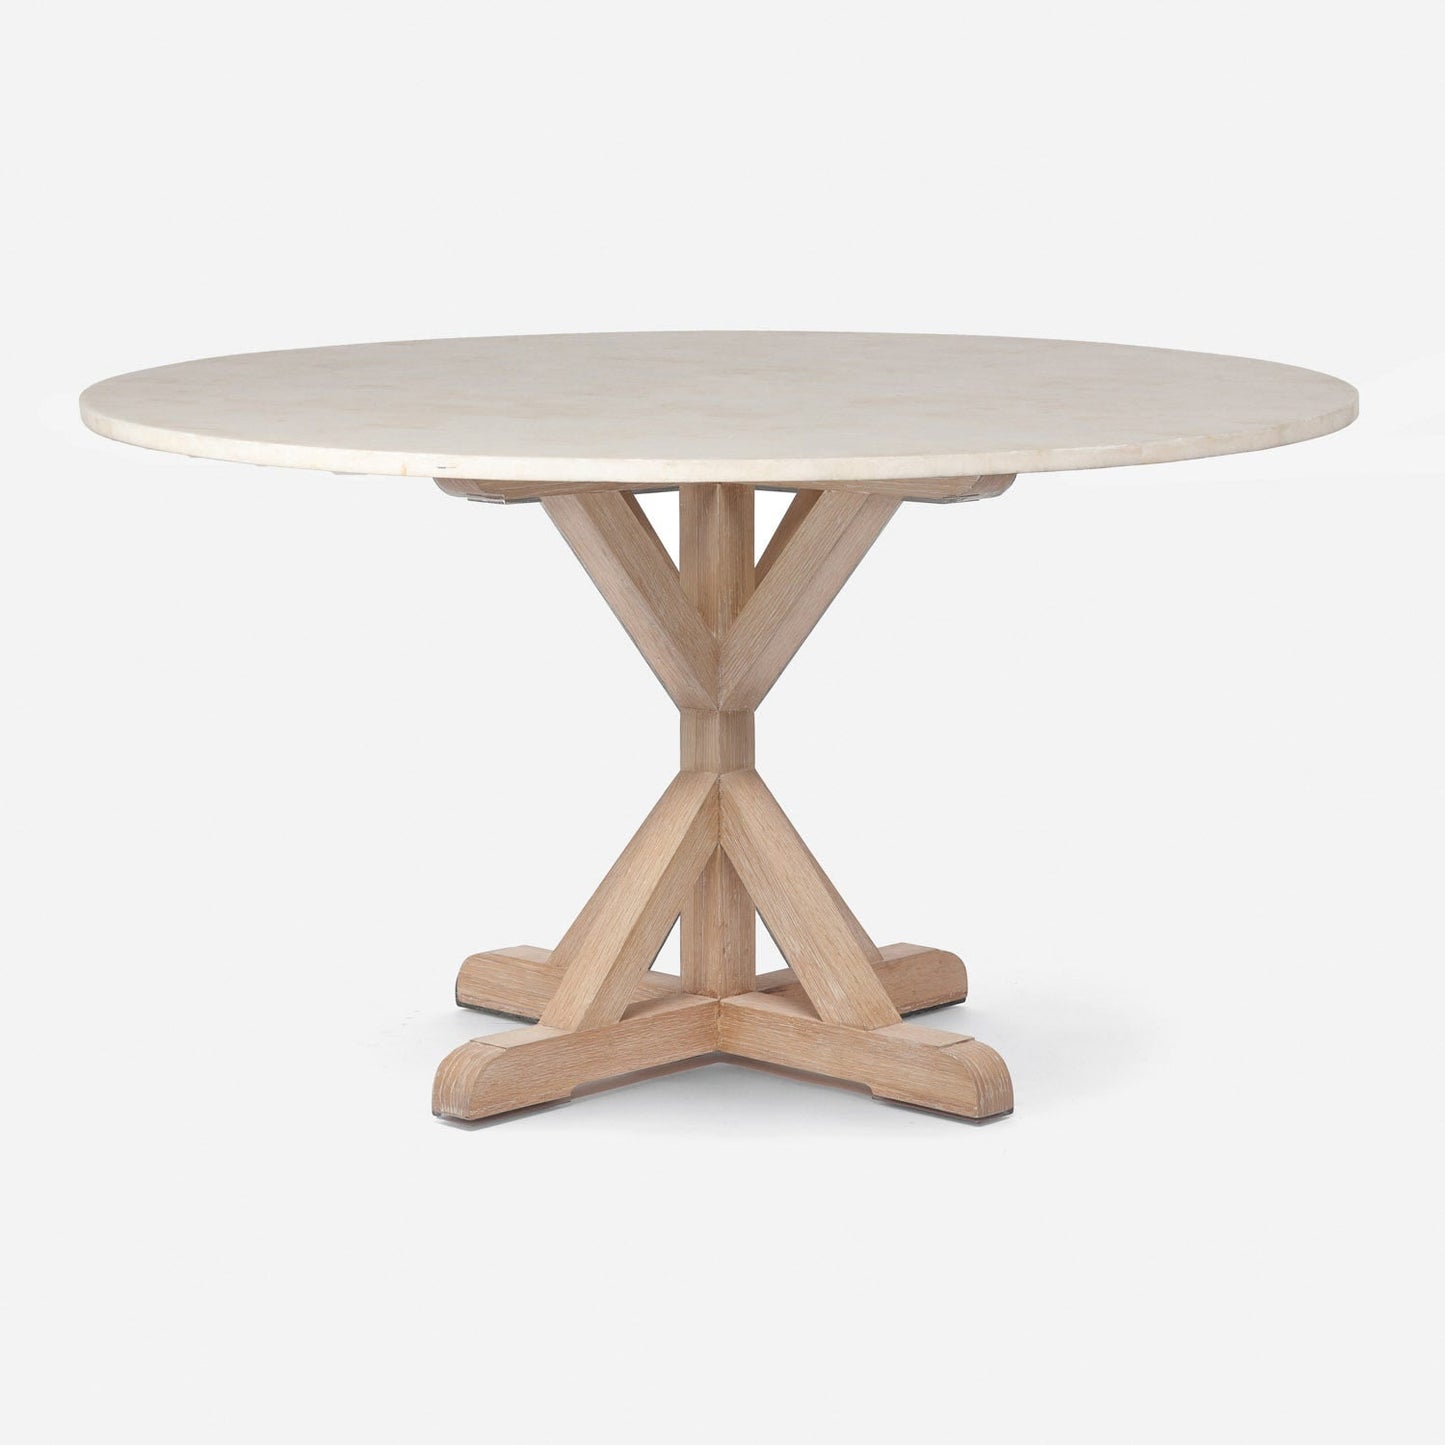 Made Goods Dane 48" x 30" White Cerused Oak Dinning Table With Round Ice Crystal Stone Table Top